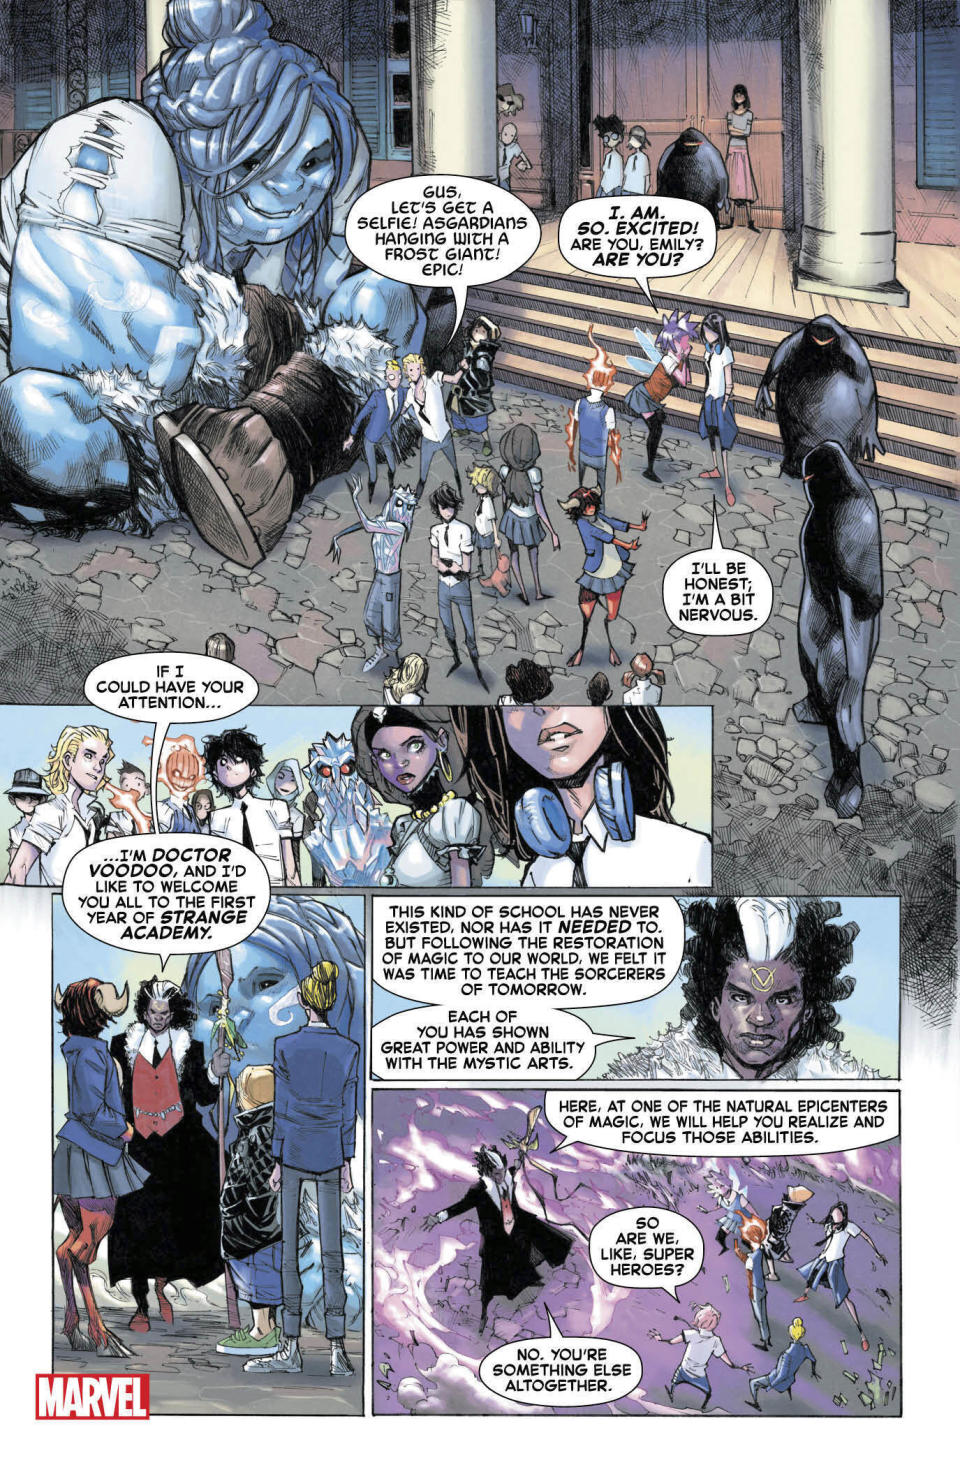 This image released by Marvel shows a page from the upcoming "Strange Academy" comic book. Marvel announced Thursday that the comic about a New Orleans-based school for young people with mystical powers will debut in March. (Humberto Ramos/Marvel via AP)